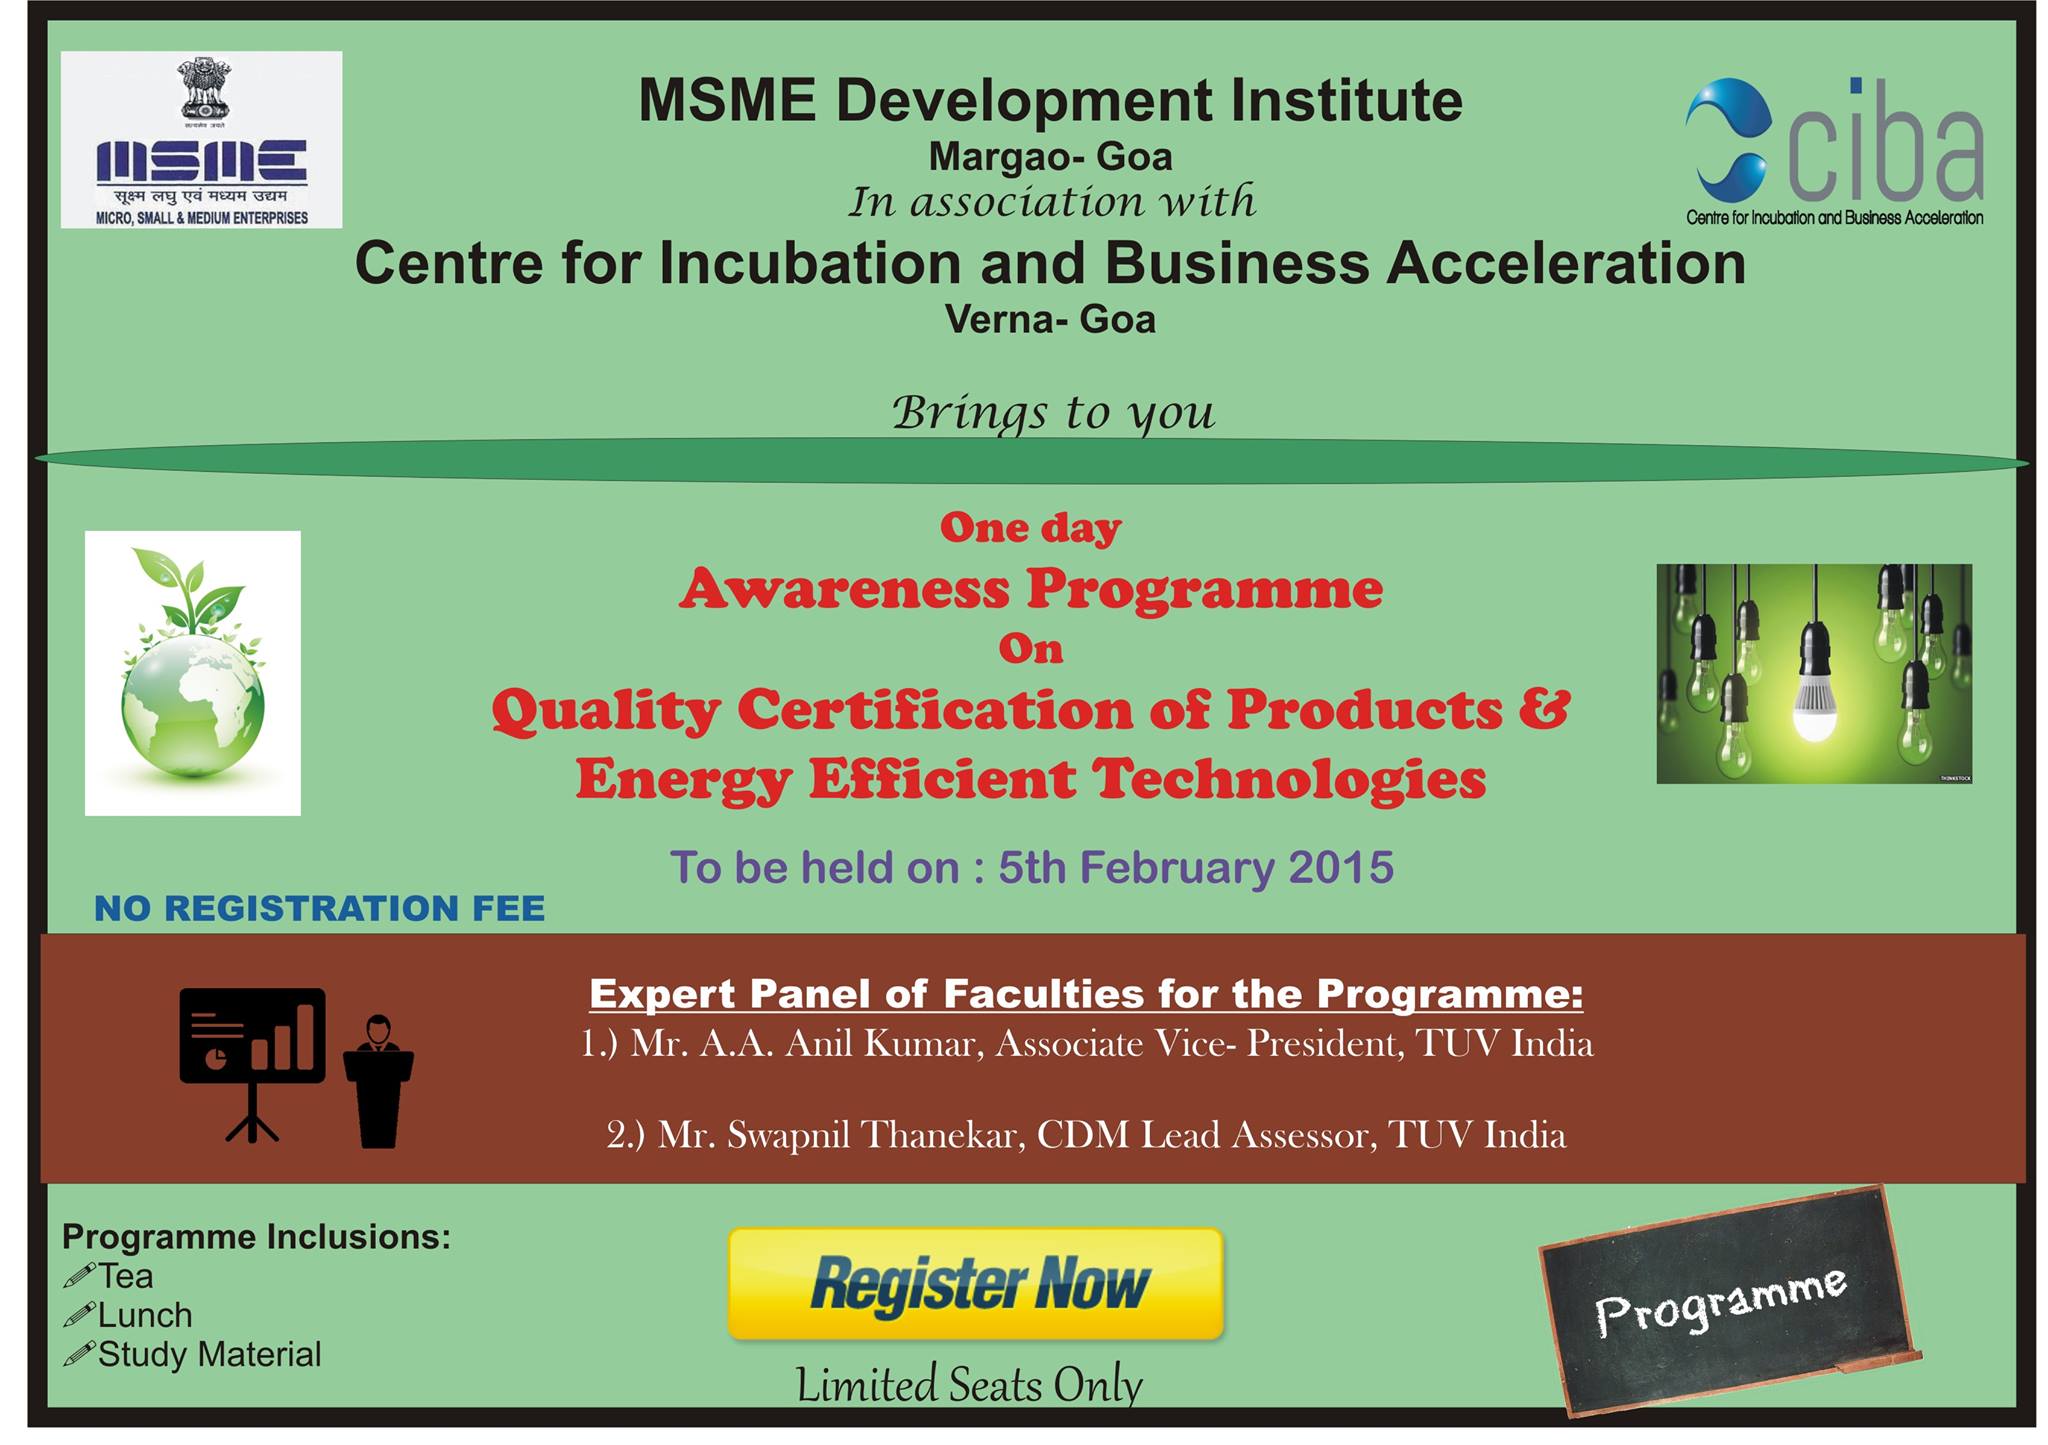 ciba-Awareness programme on Quality Certification of Products” & “Energy Efficient Technologies